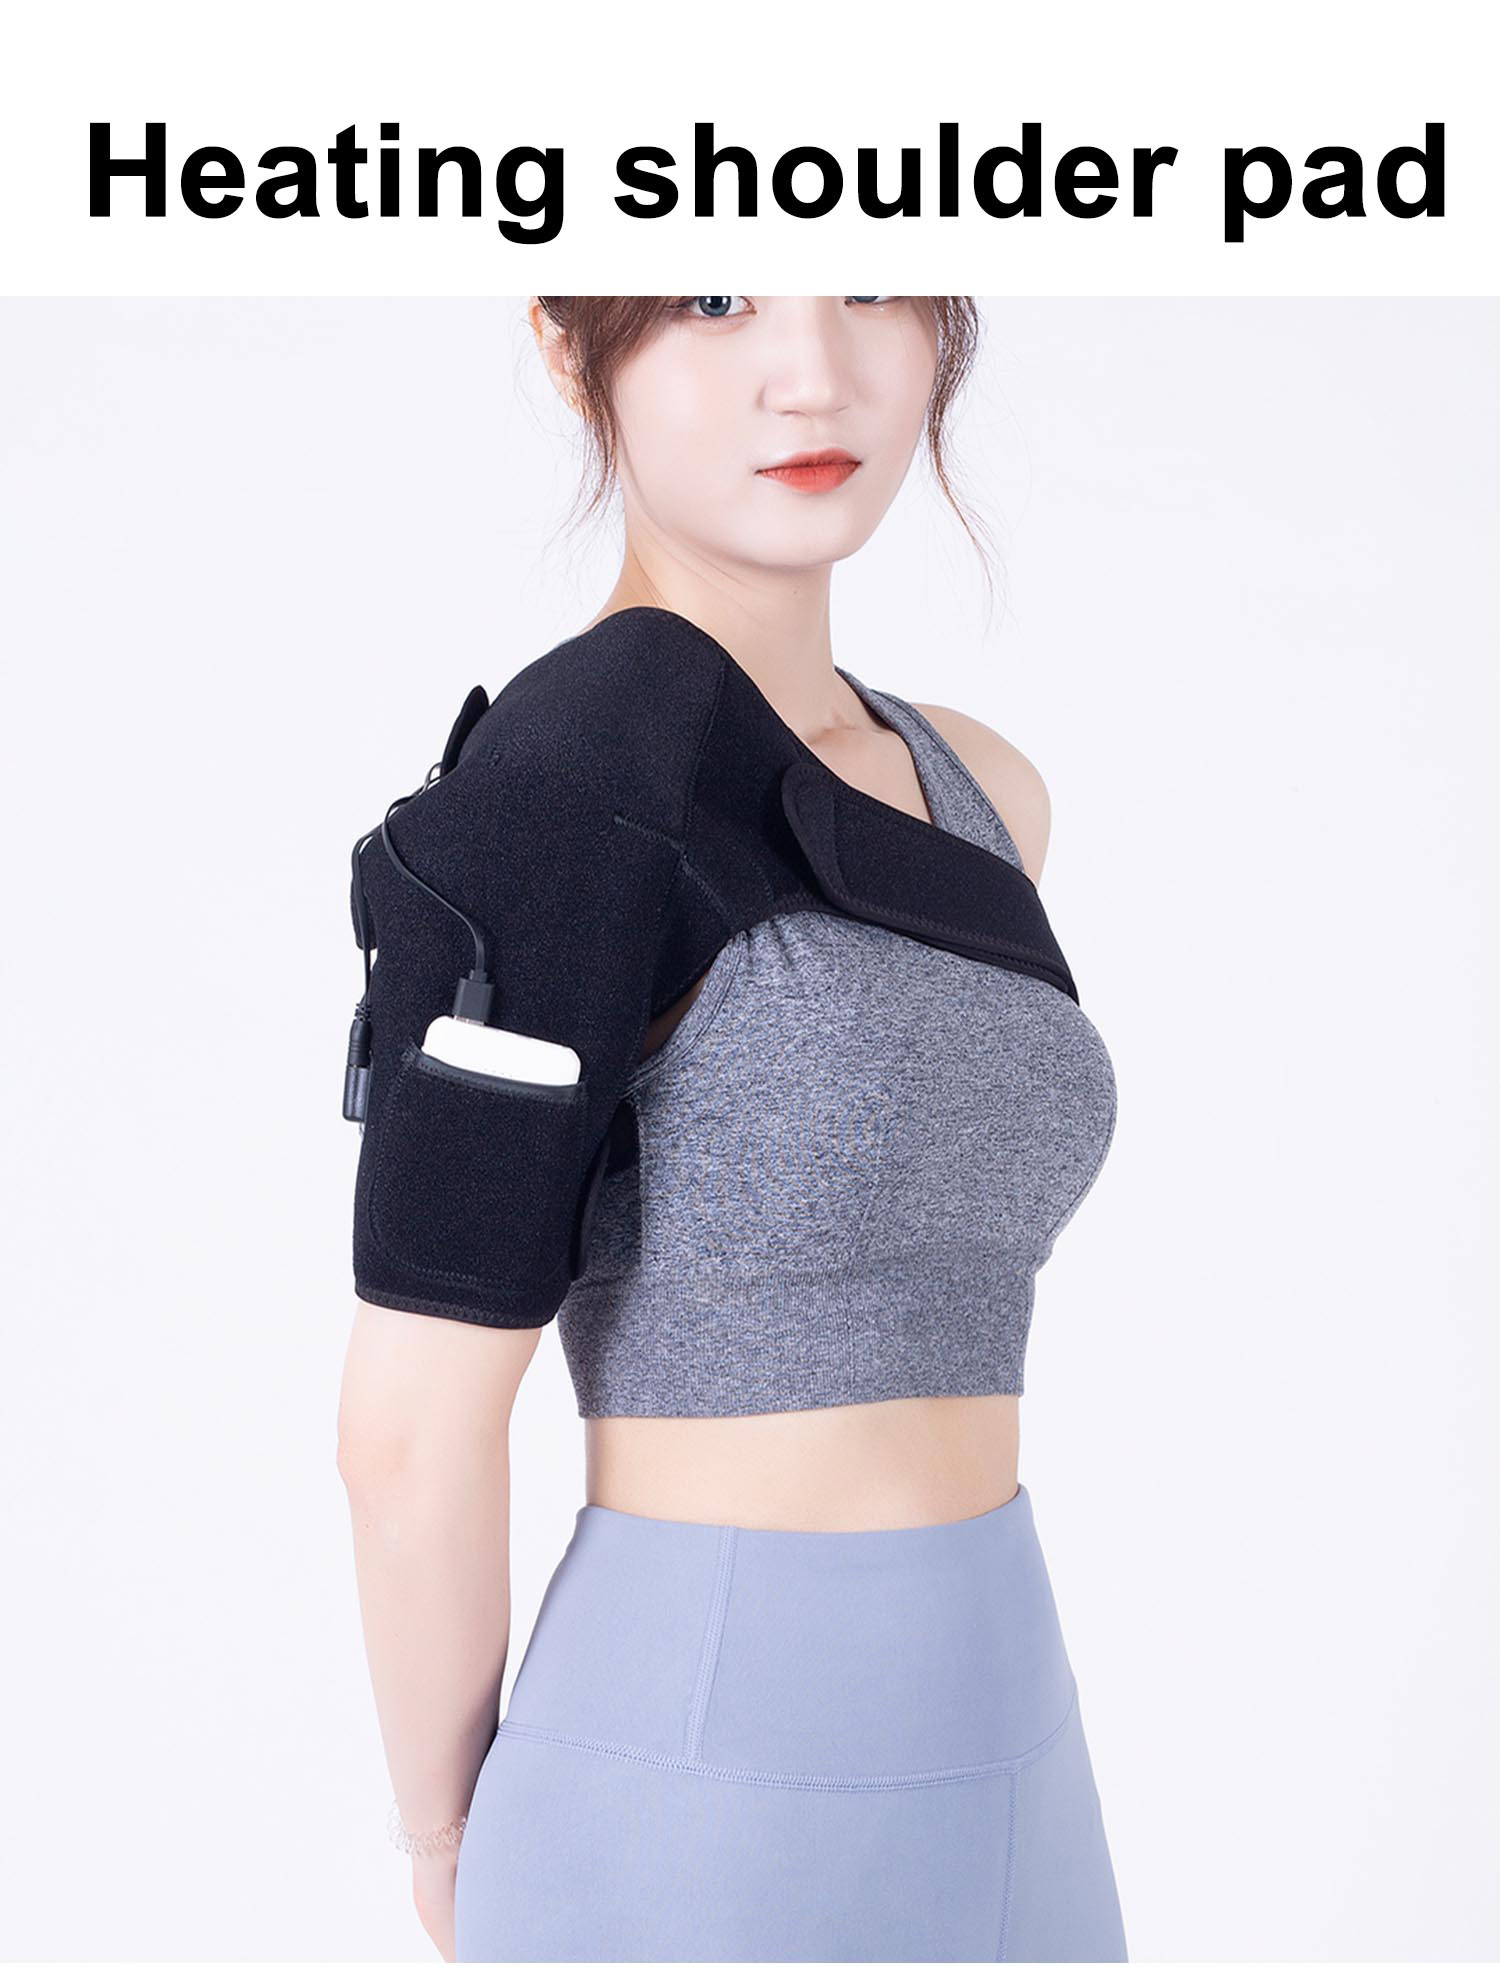 electric heating pad for neck and shoulders